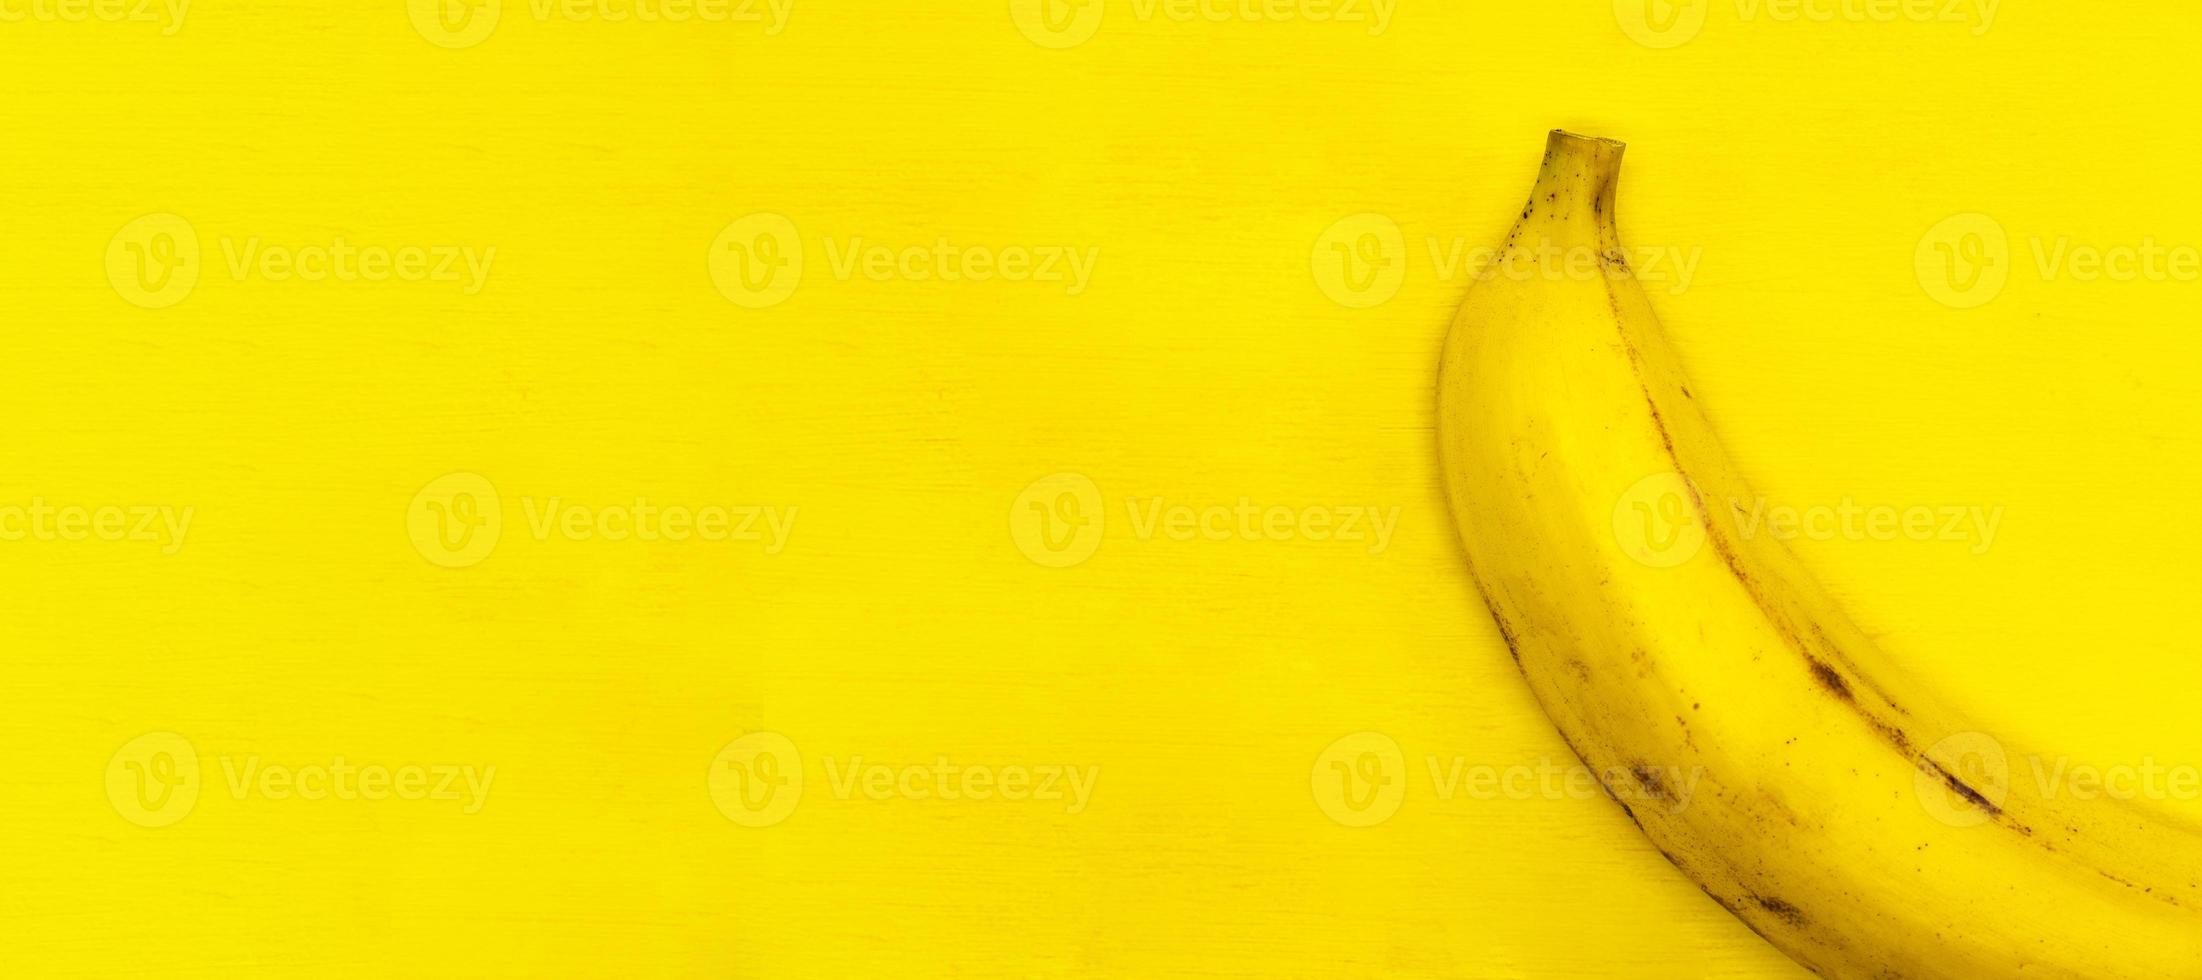 Ripe banana isolated on a yellow background close up with a blank space for your text photo